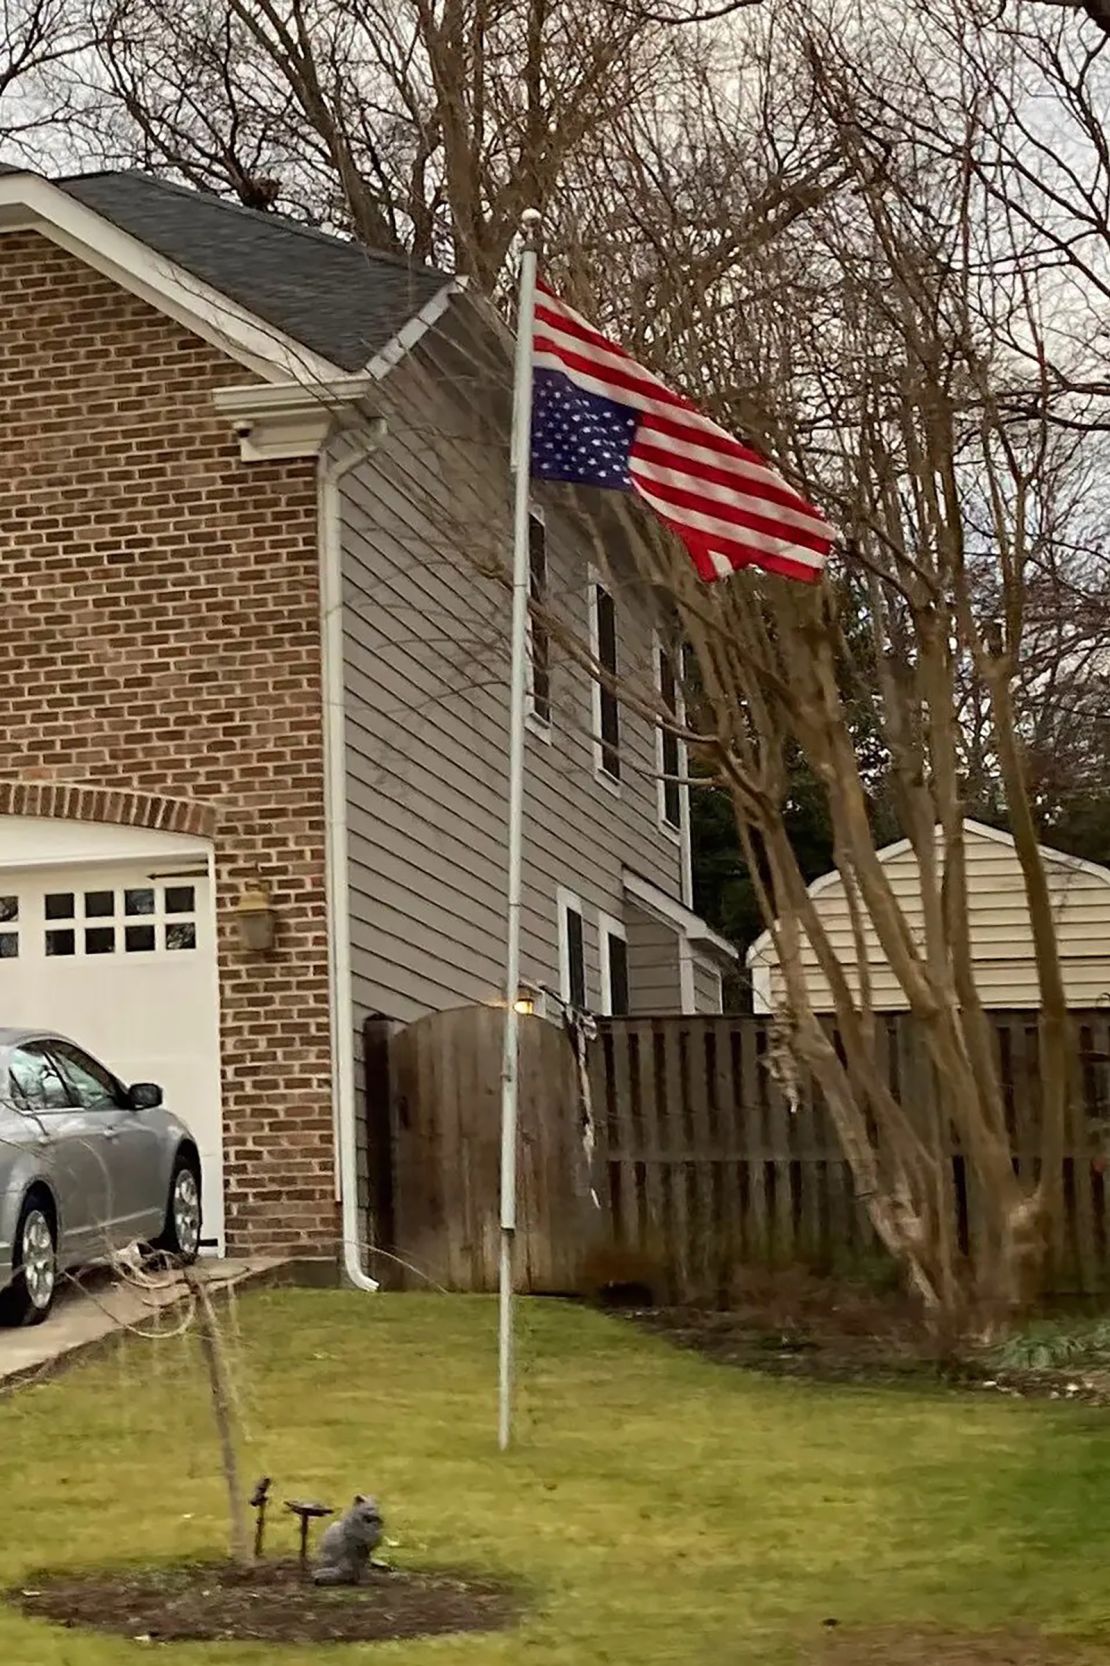 A photo obtained by The New York Times shows an inverted flag at the Alito residence on January 17, 2021, three days before Joe Biden's inauguration.